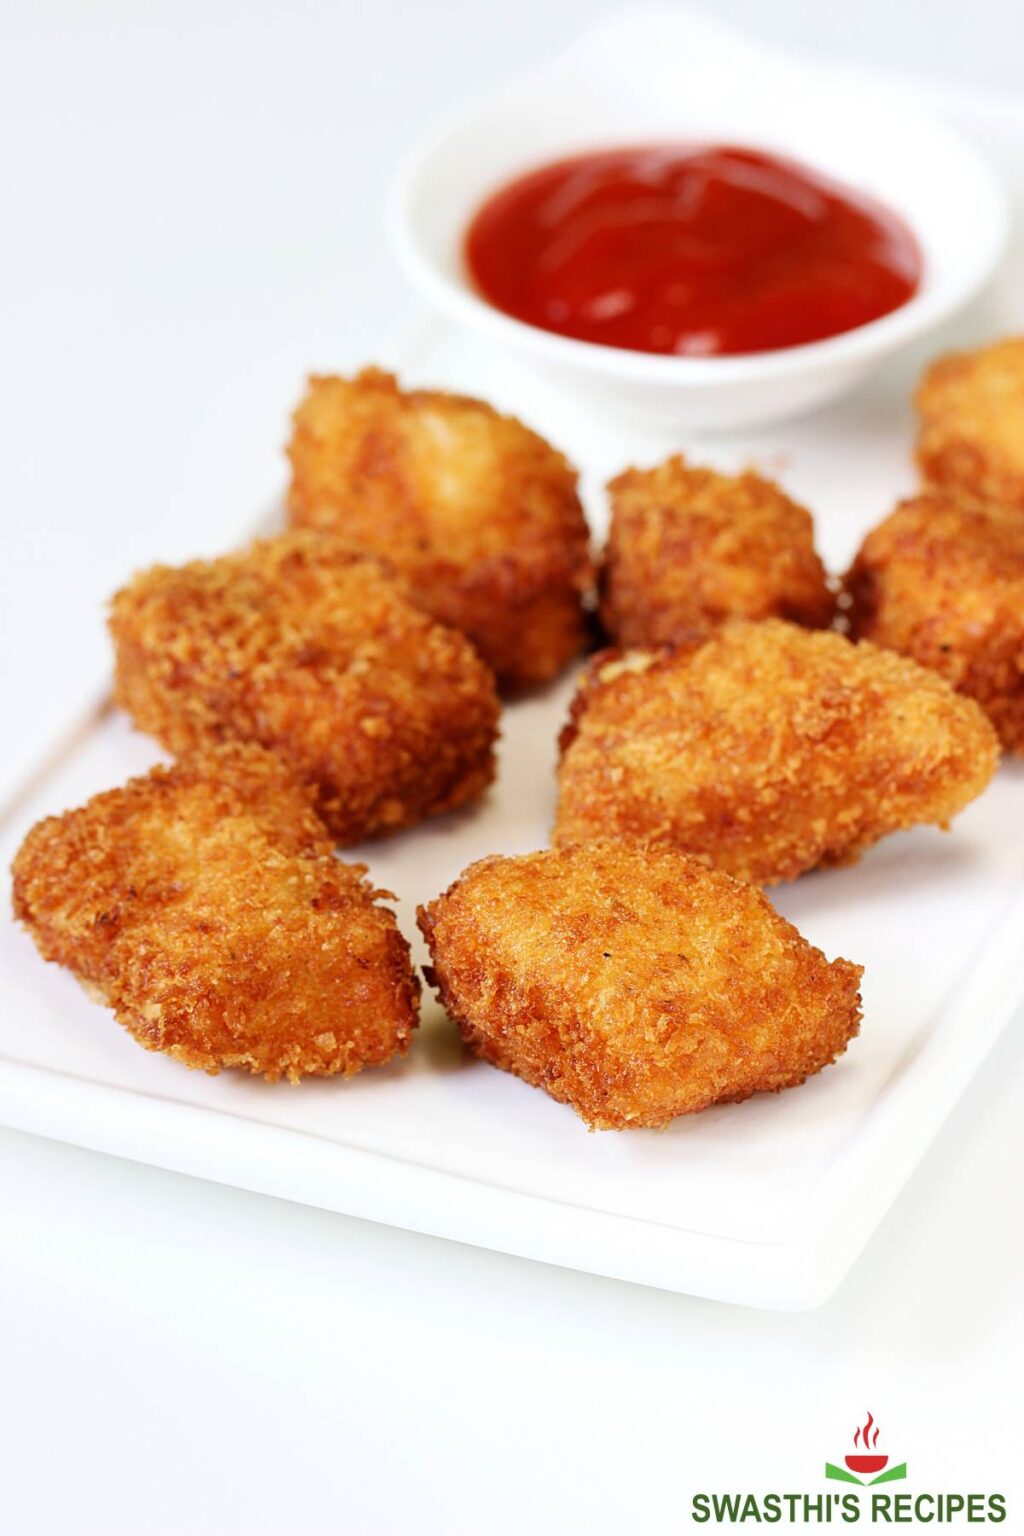 Chicken nuggets (fried, baked & air fryer) - Swasthi's Recipes